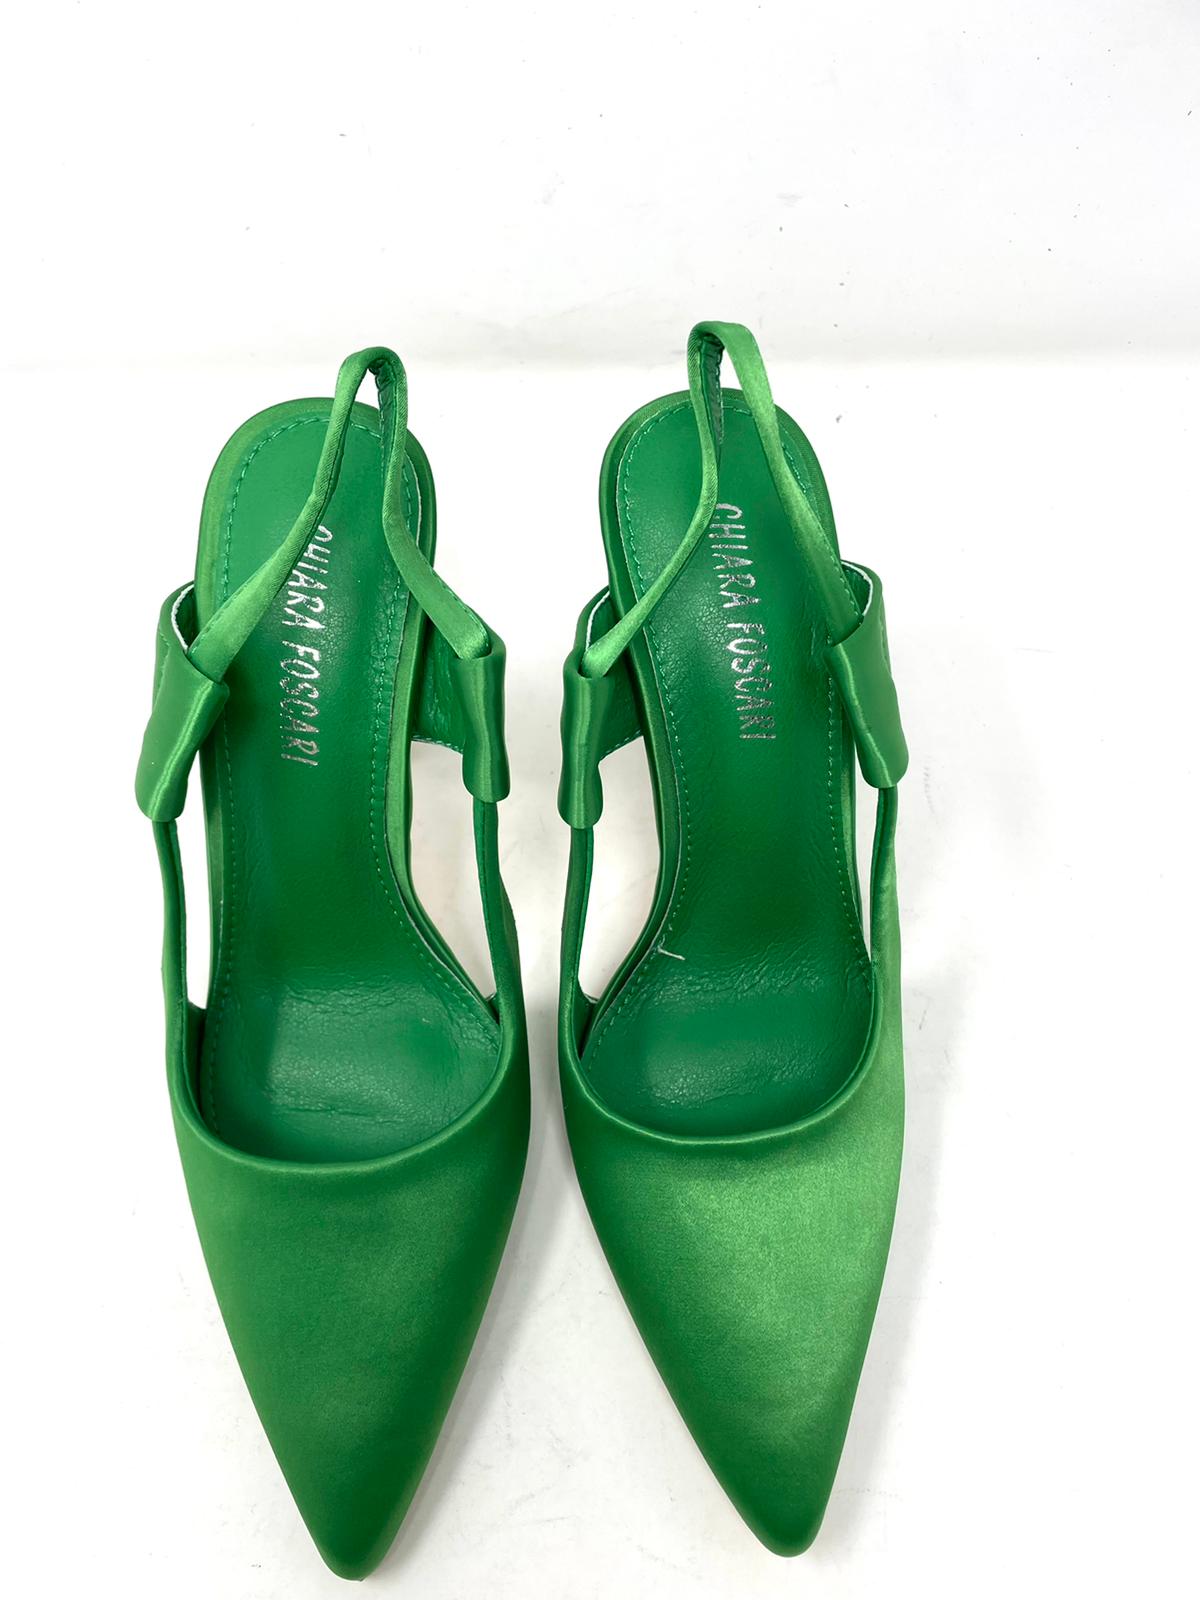 Women's pumps with opening